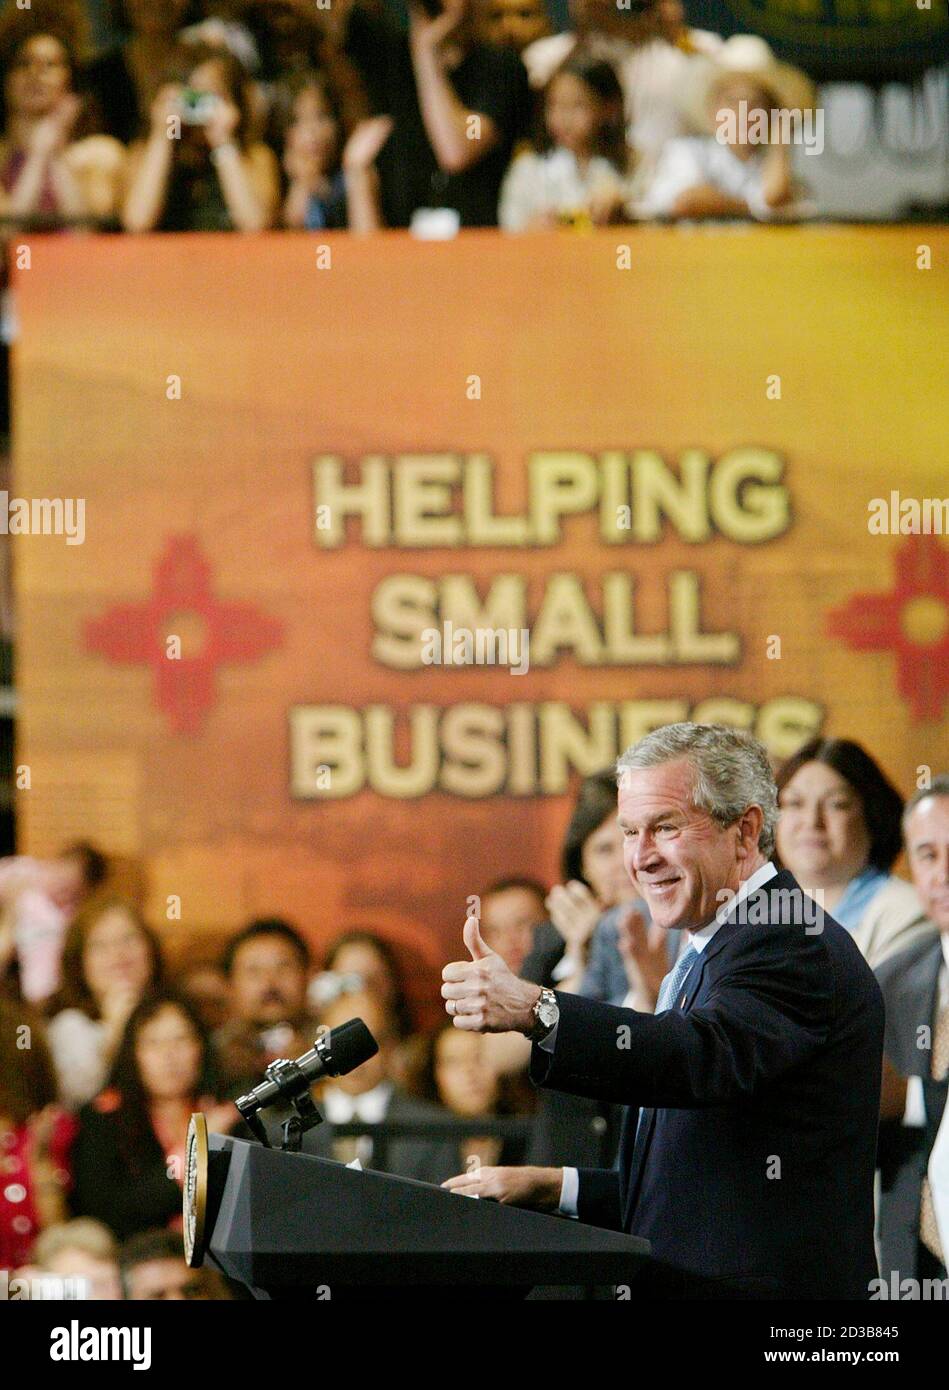 U.S. President George W. Bush pushes his jobs and growth plan while visiting MCT Industries in Bernalillo, New Mexico, May 12, 2003. Buoyed by polls showing public support for tax cuts may be on the rise, President Bush launched on Monday a three-state tour aimed at getting moderate Democrats in the Senate to drop their opposition to his half-trillion-dollar plan. REUTERS/Larry Downing  LSD Stock Photo